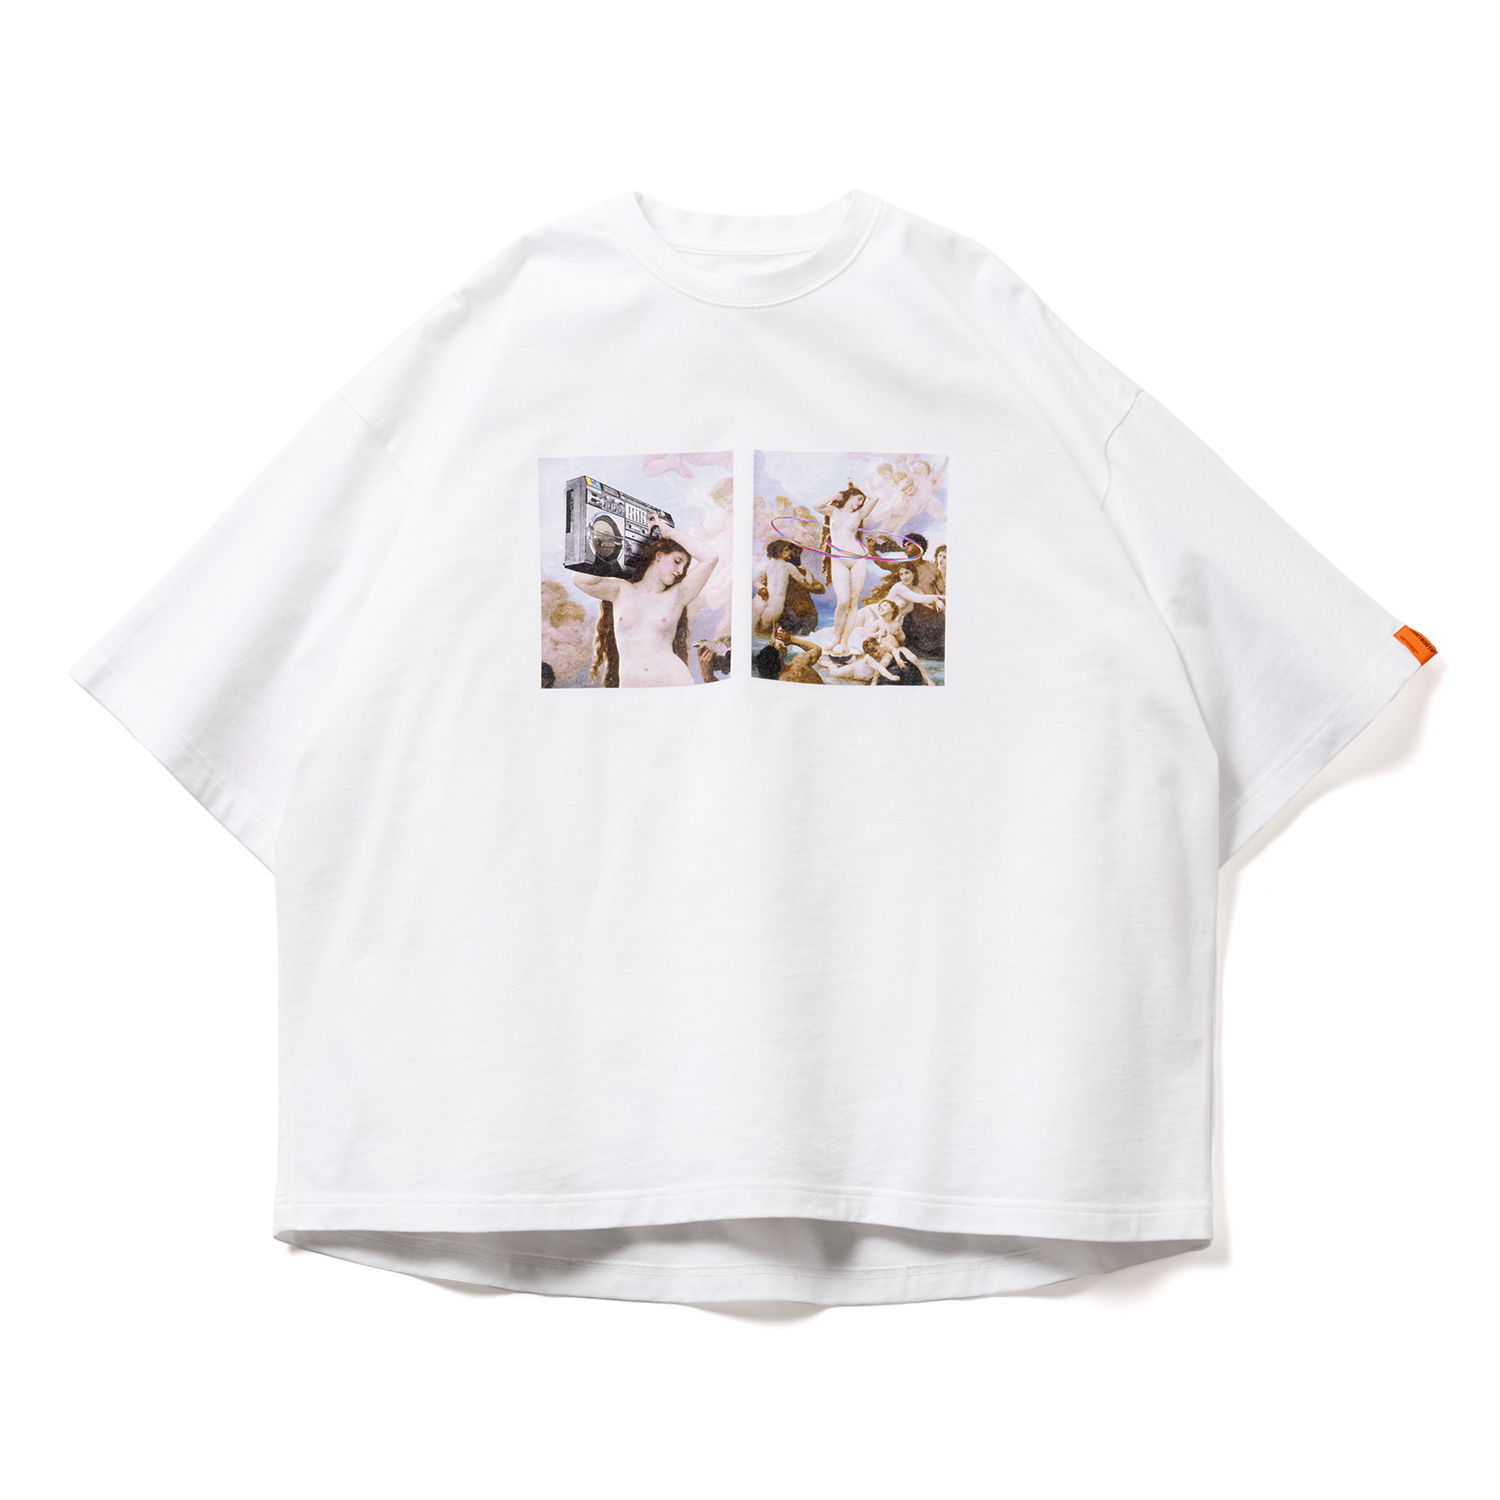 TIGHTBOOTH/DO THE RIGHT THING T-SHIRT（White）［プリントT-22夏